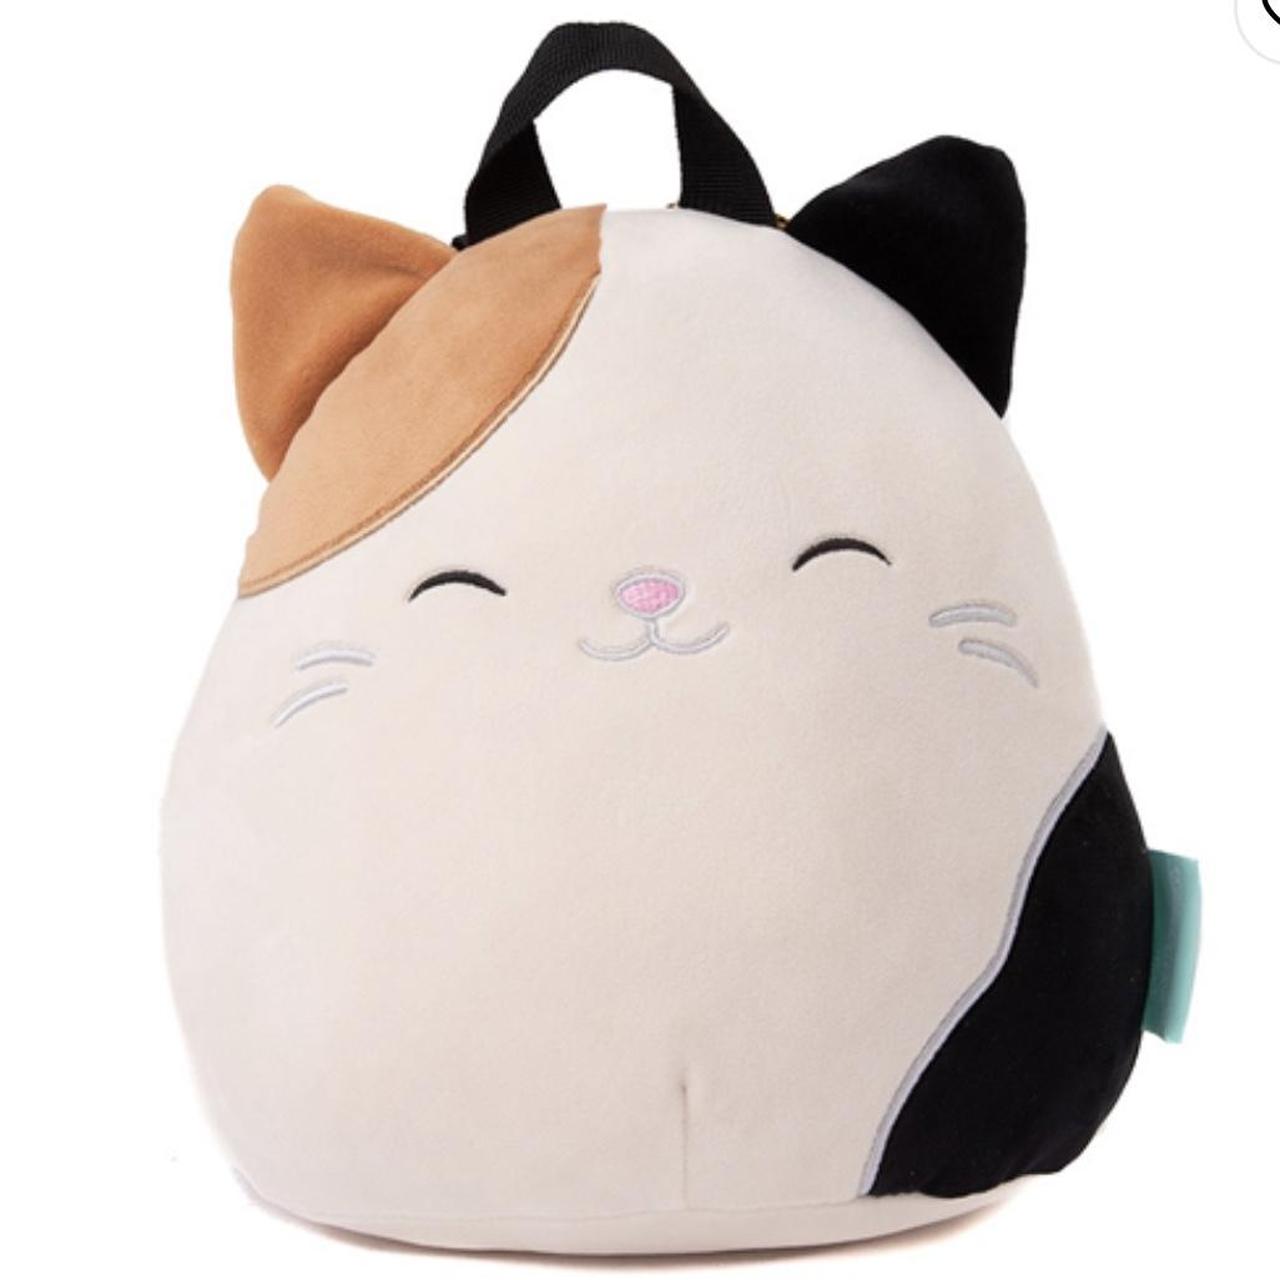 cam the calico cat squish mallow backpack 10” brand - Depop